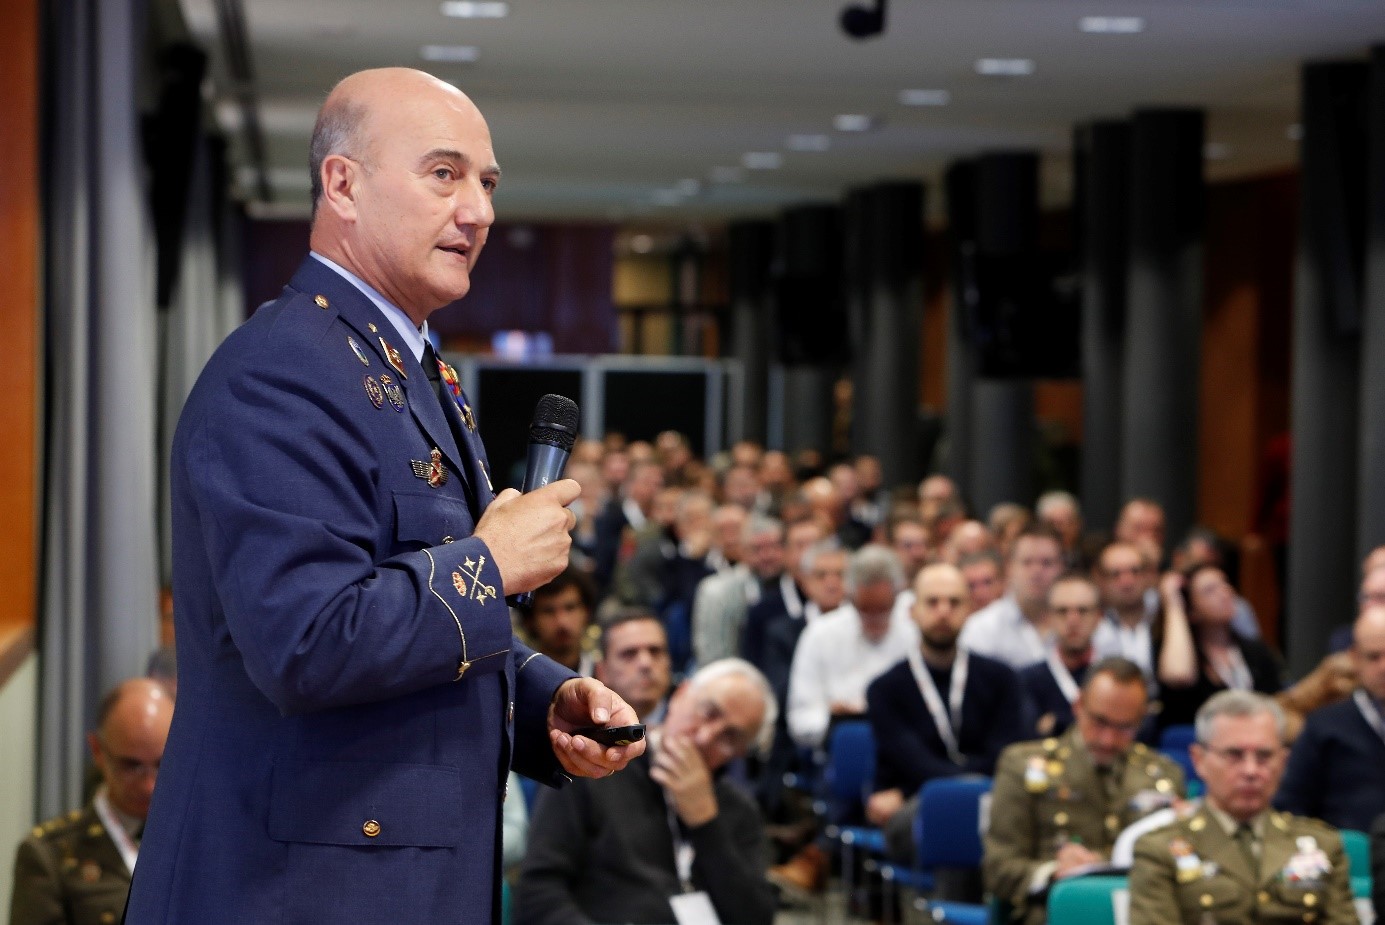 General Muñoz Bronchales gives the inaugural conference at the workshop “The Armed Forces against International Terrorism”